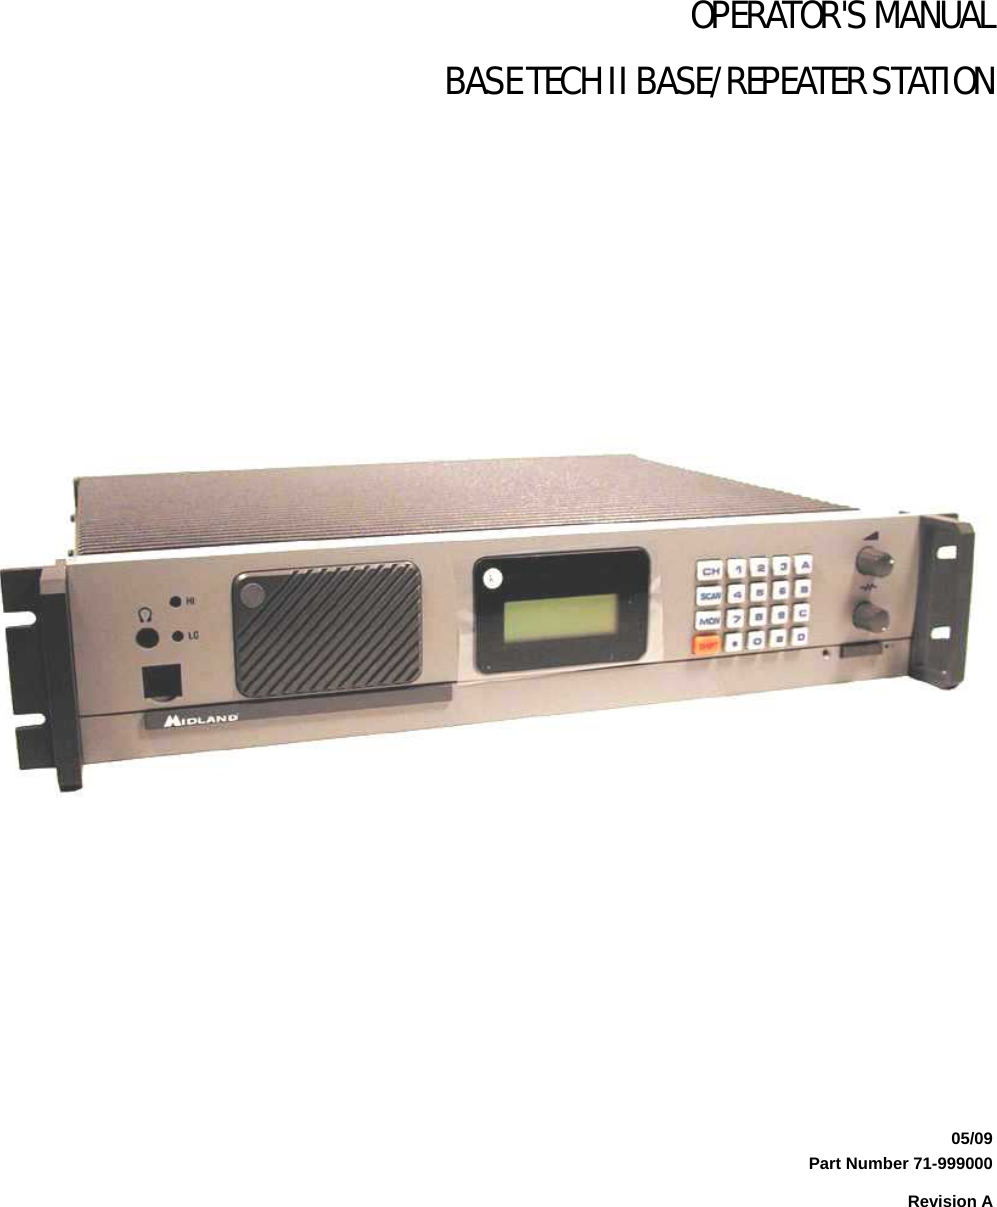  OPERATOR&apos;S MANUAL BASE TECH II BASE/REPEATER STATION                     05/09 Part Number 71-999000 Revision A 